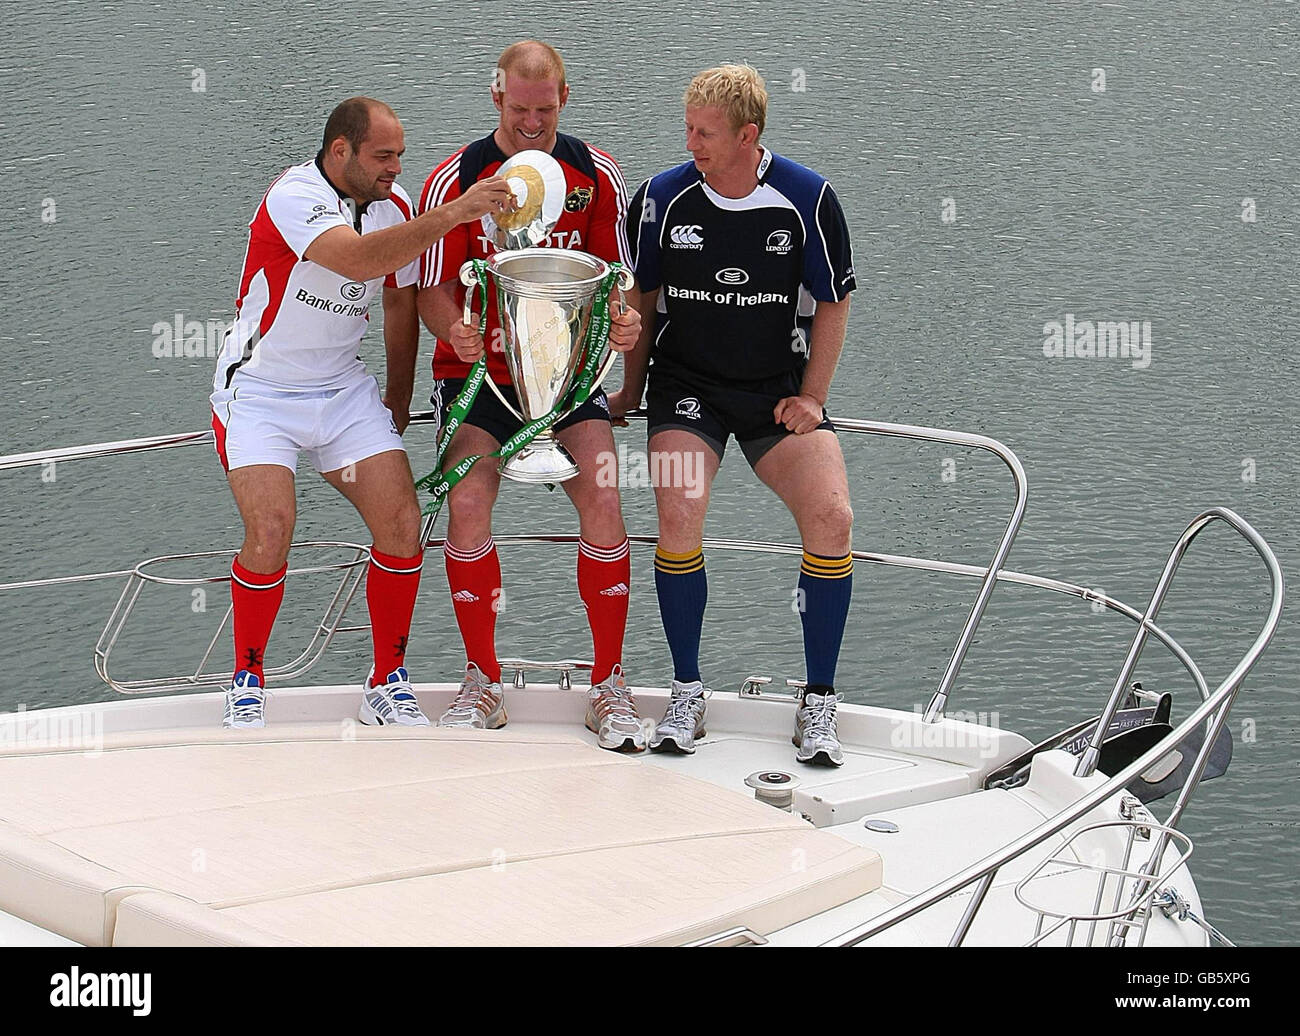 Leinster's Leo Cullen (right) with Munster's Paul O'Connell (centre) and Ulster's Rory Best with the Heineken Cup during the Heineken Cup Launch at the marina near Cruzzo Restaurant in Malahide, Dublin, Ireland. Stock Photo